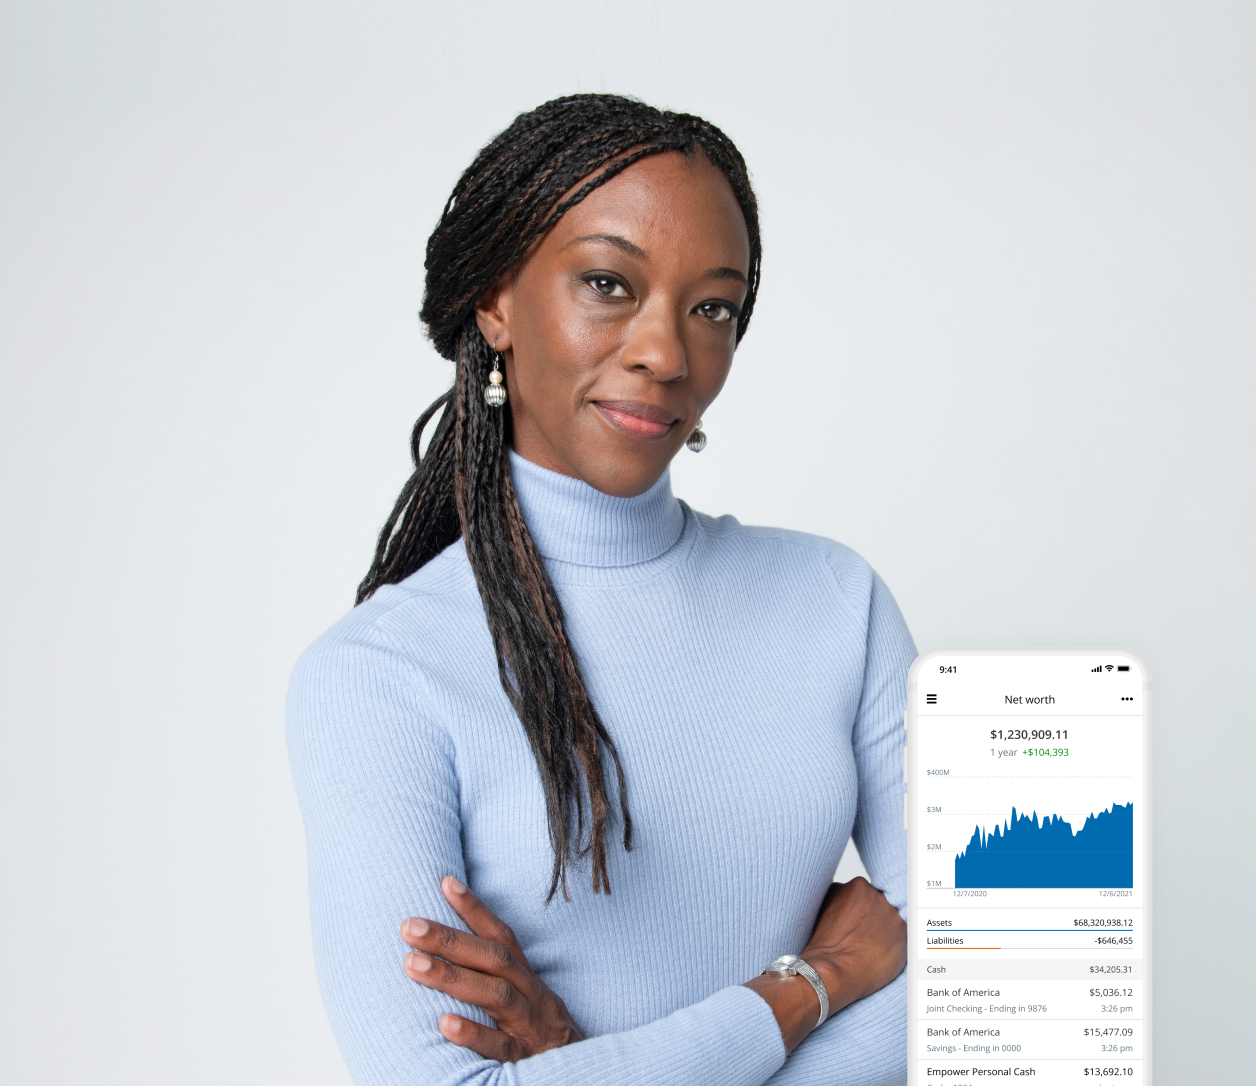 woman with blue turtleneck sweater crossing arms smiling, phone screenshot of financial chart bottom right of image 